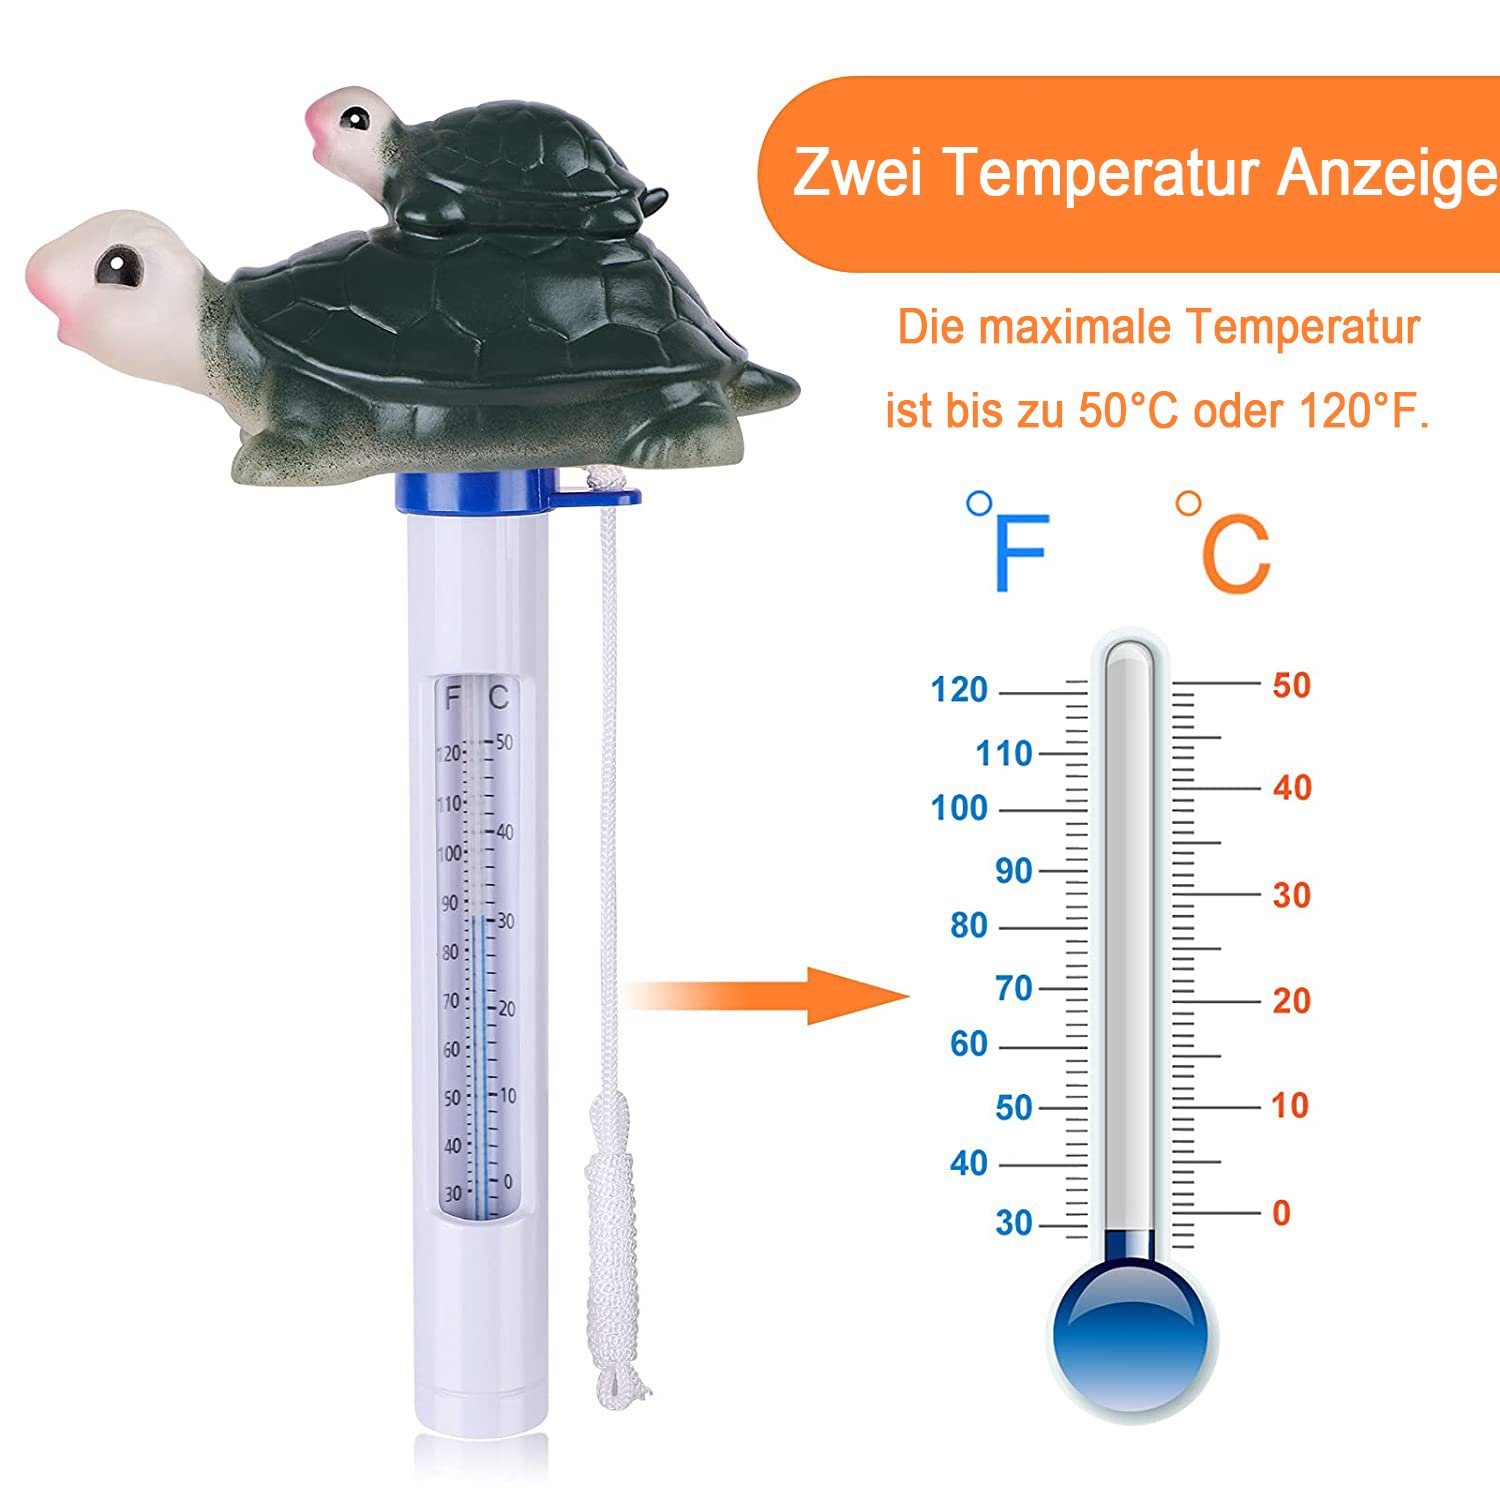 Pool Thermometer Schwimmbad Poolthermometer Temperatur Wassertemperatur Spa 